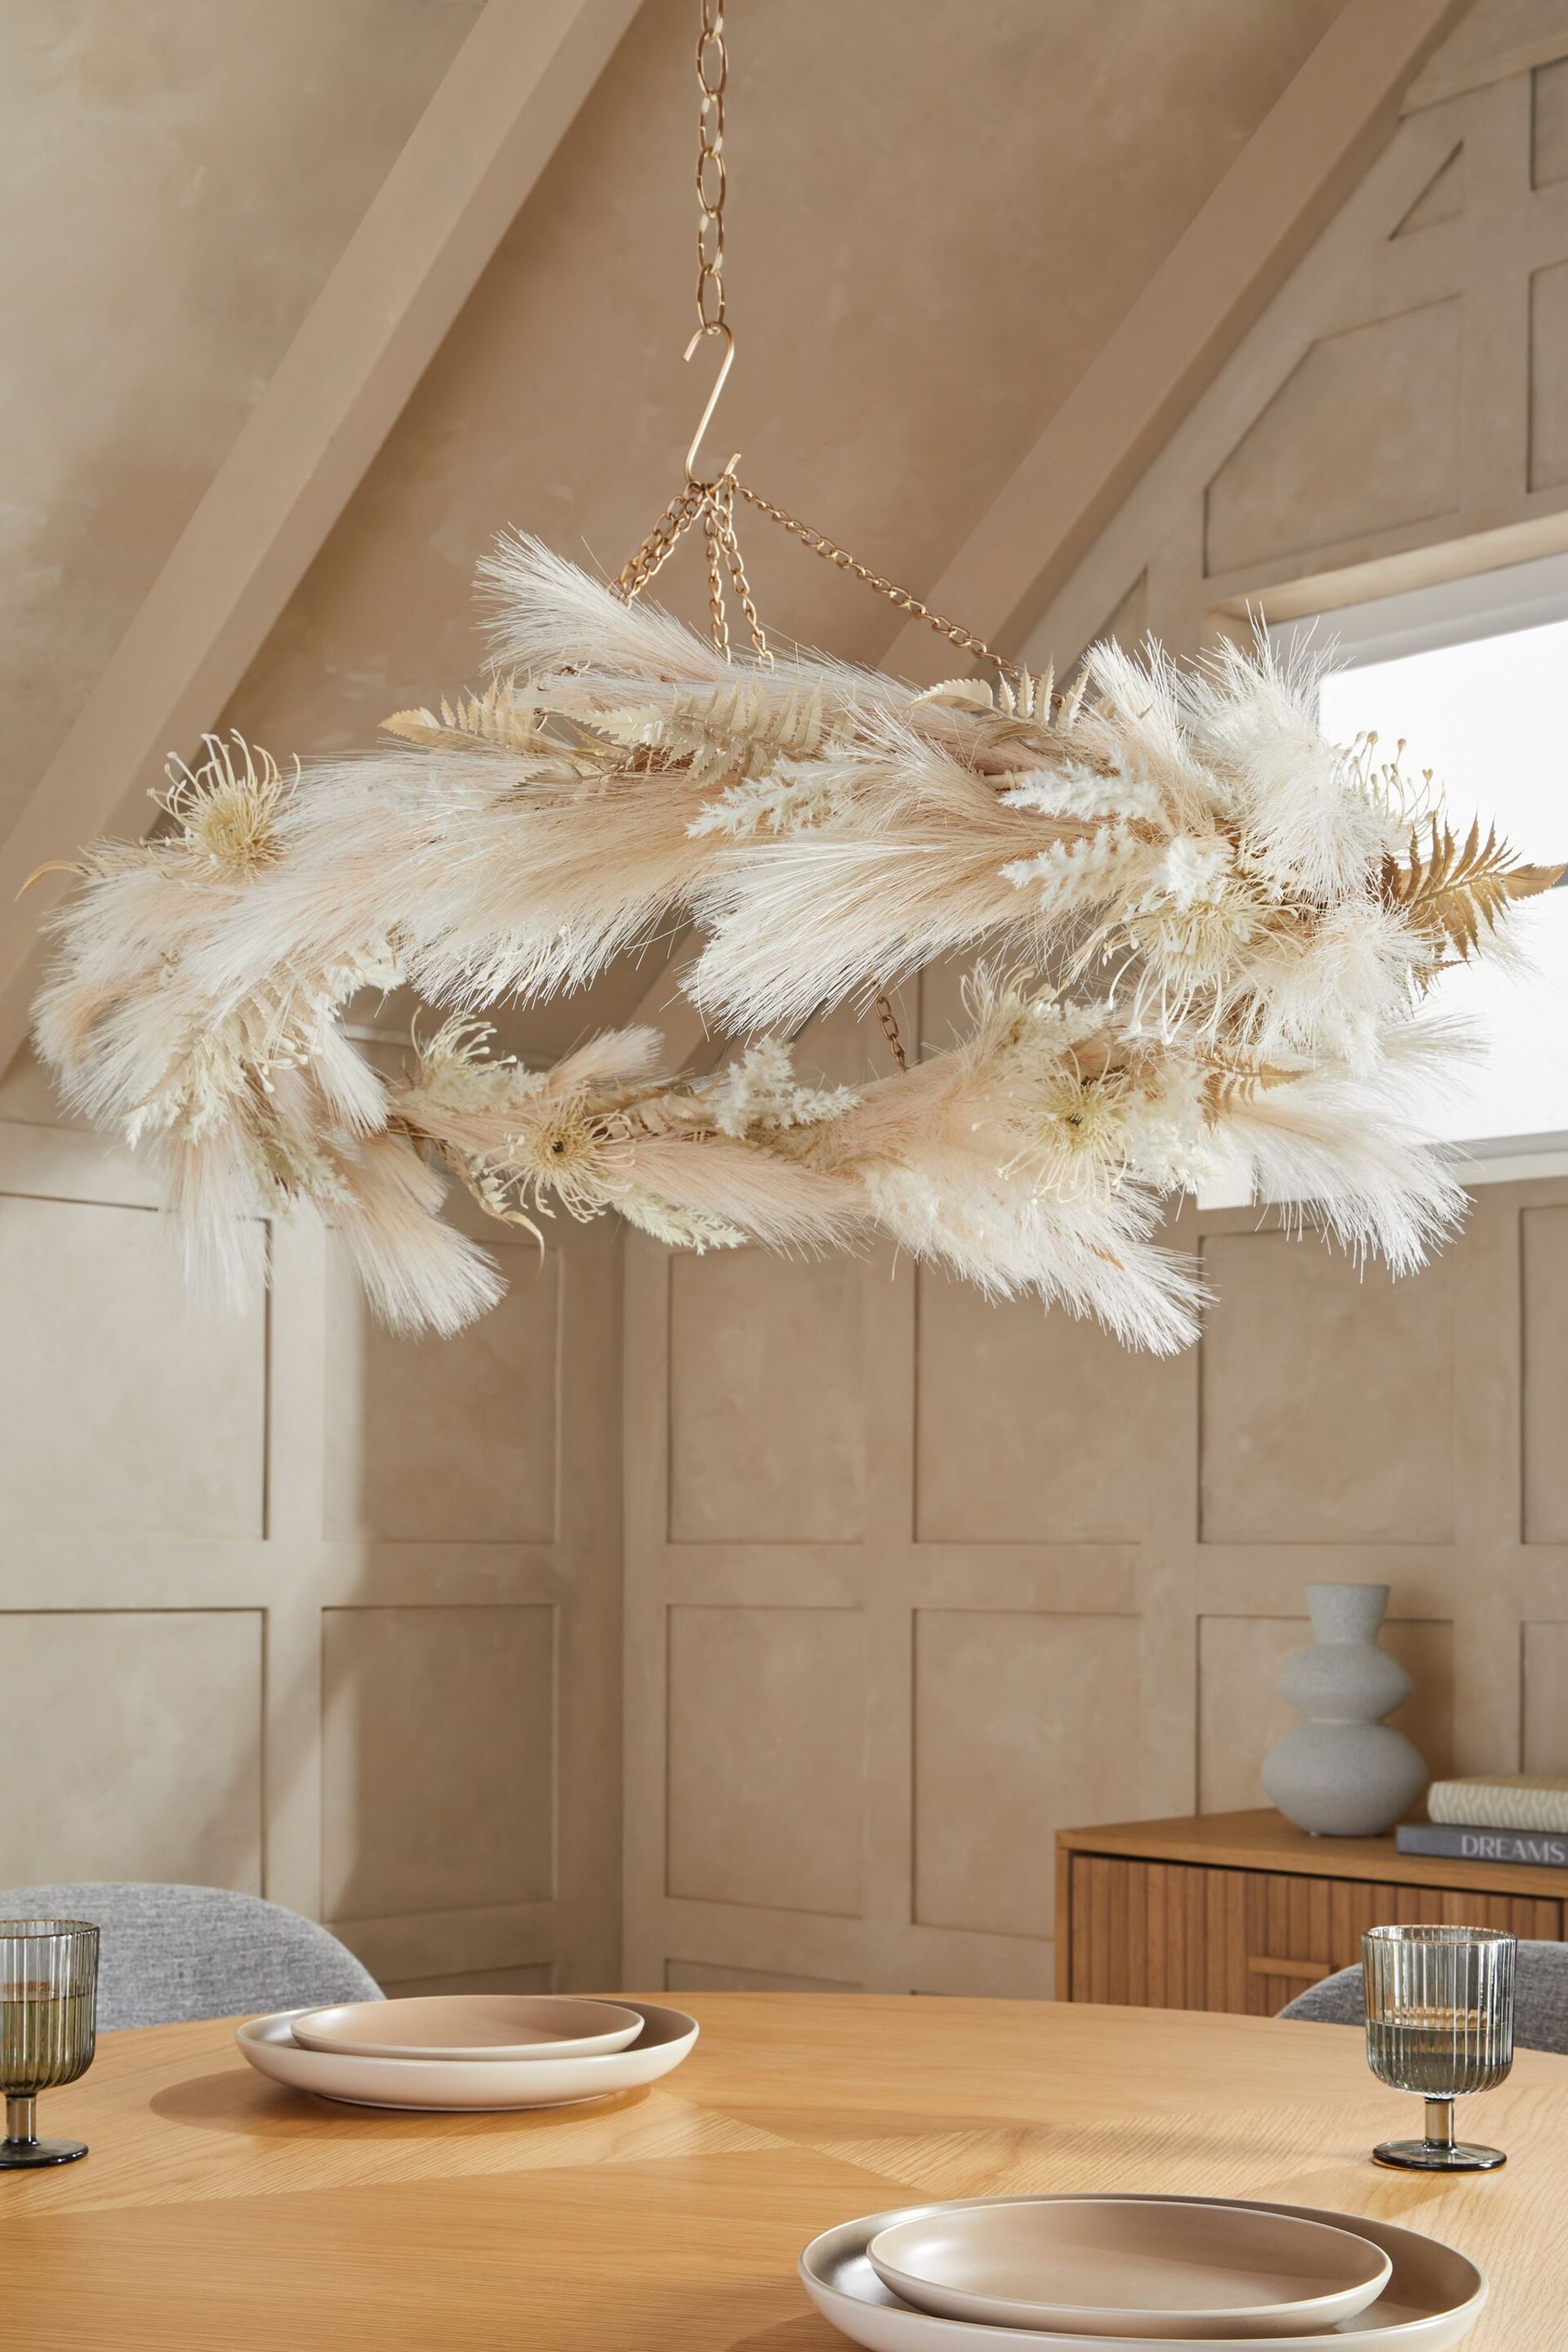 Natural Artificial Dried Floral Ceiling Decoration - Image 1 of 3